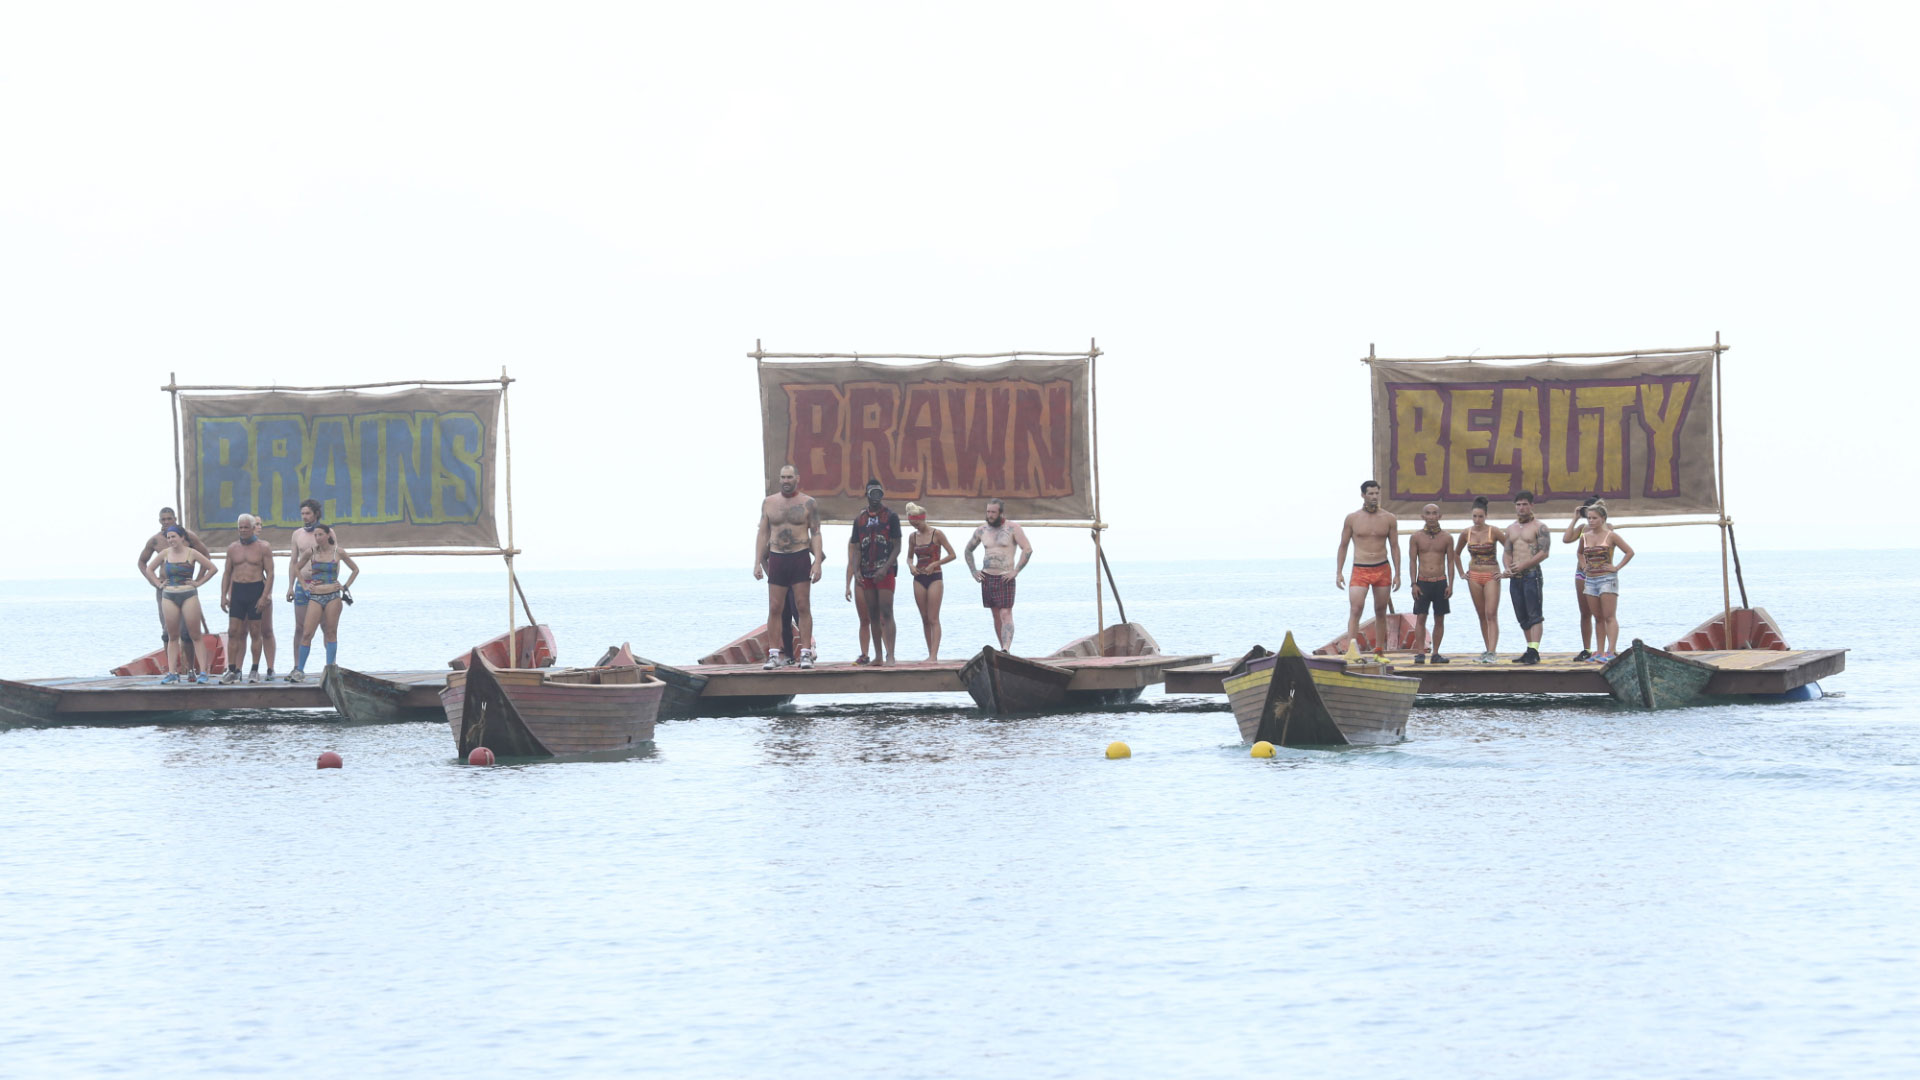 The two-hour Survivor Season 32 finale airs Wednesday, May 18 at 8/7c, followed by the Survivor Live Reunion at 10/9c.